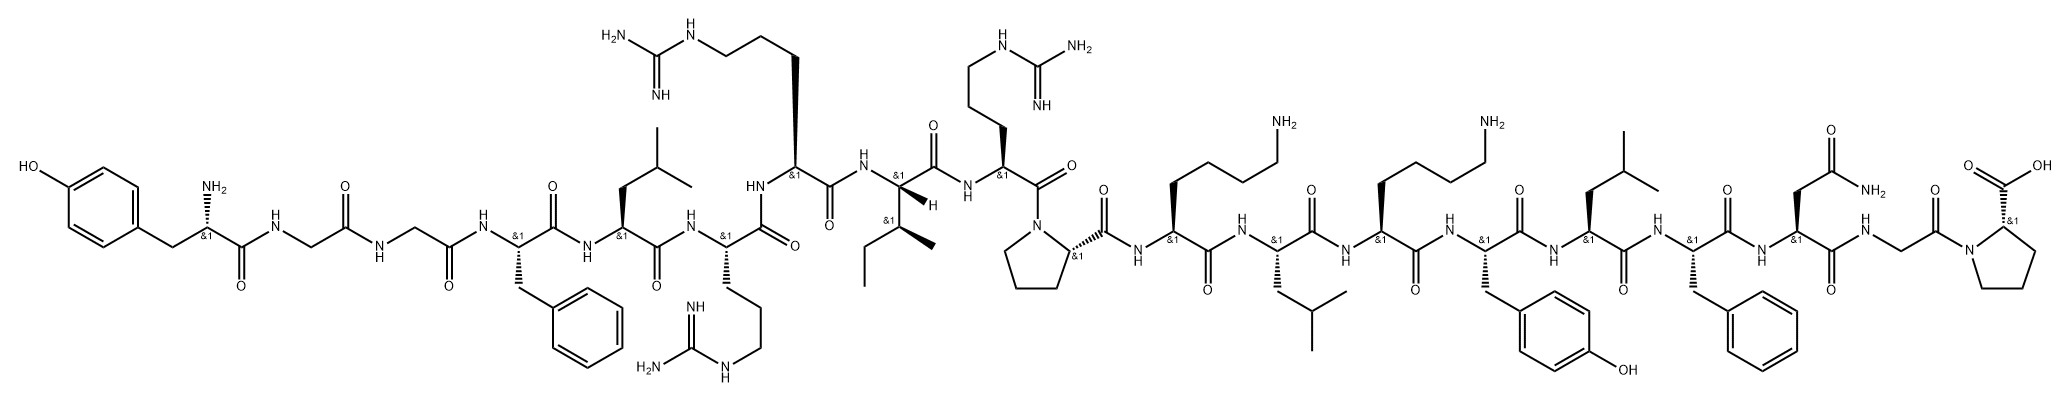 dynorphin A (1-13), Tyr(14)-Leu(15)-Phe(16)-Asn(17)-Gly(18)-Pro(19)- Structure